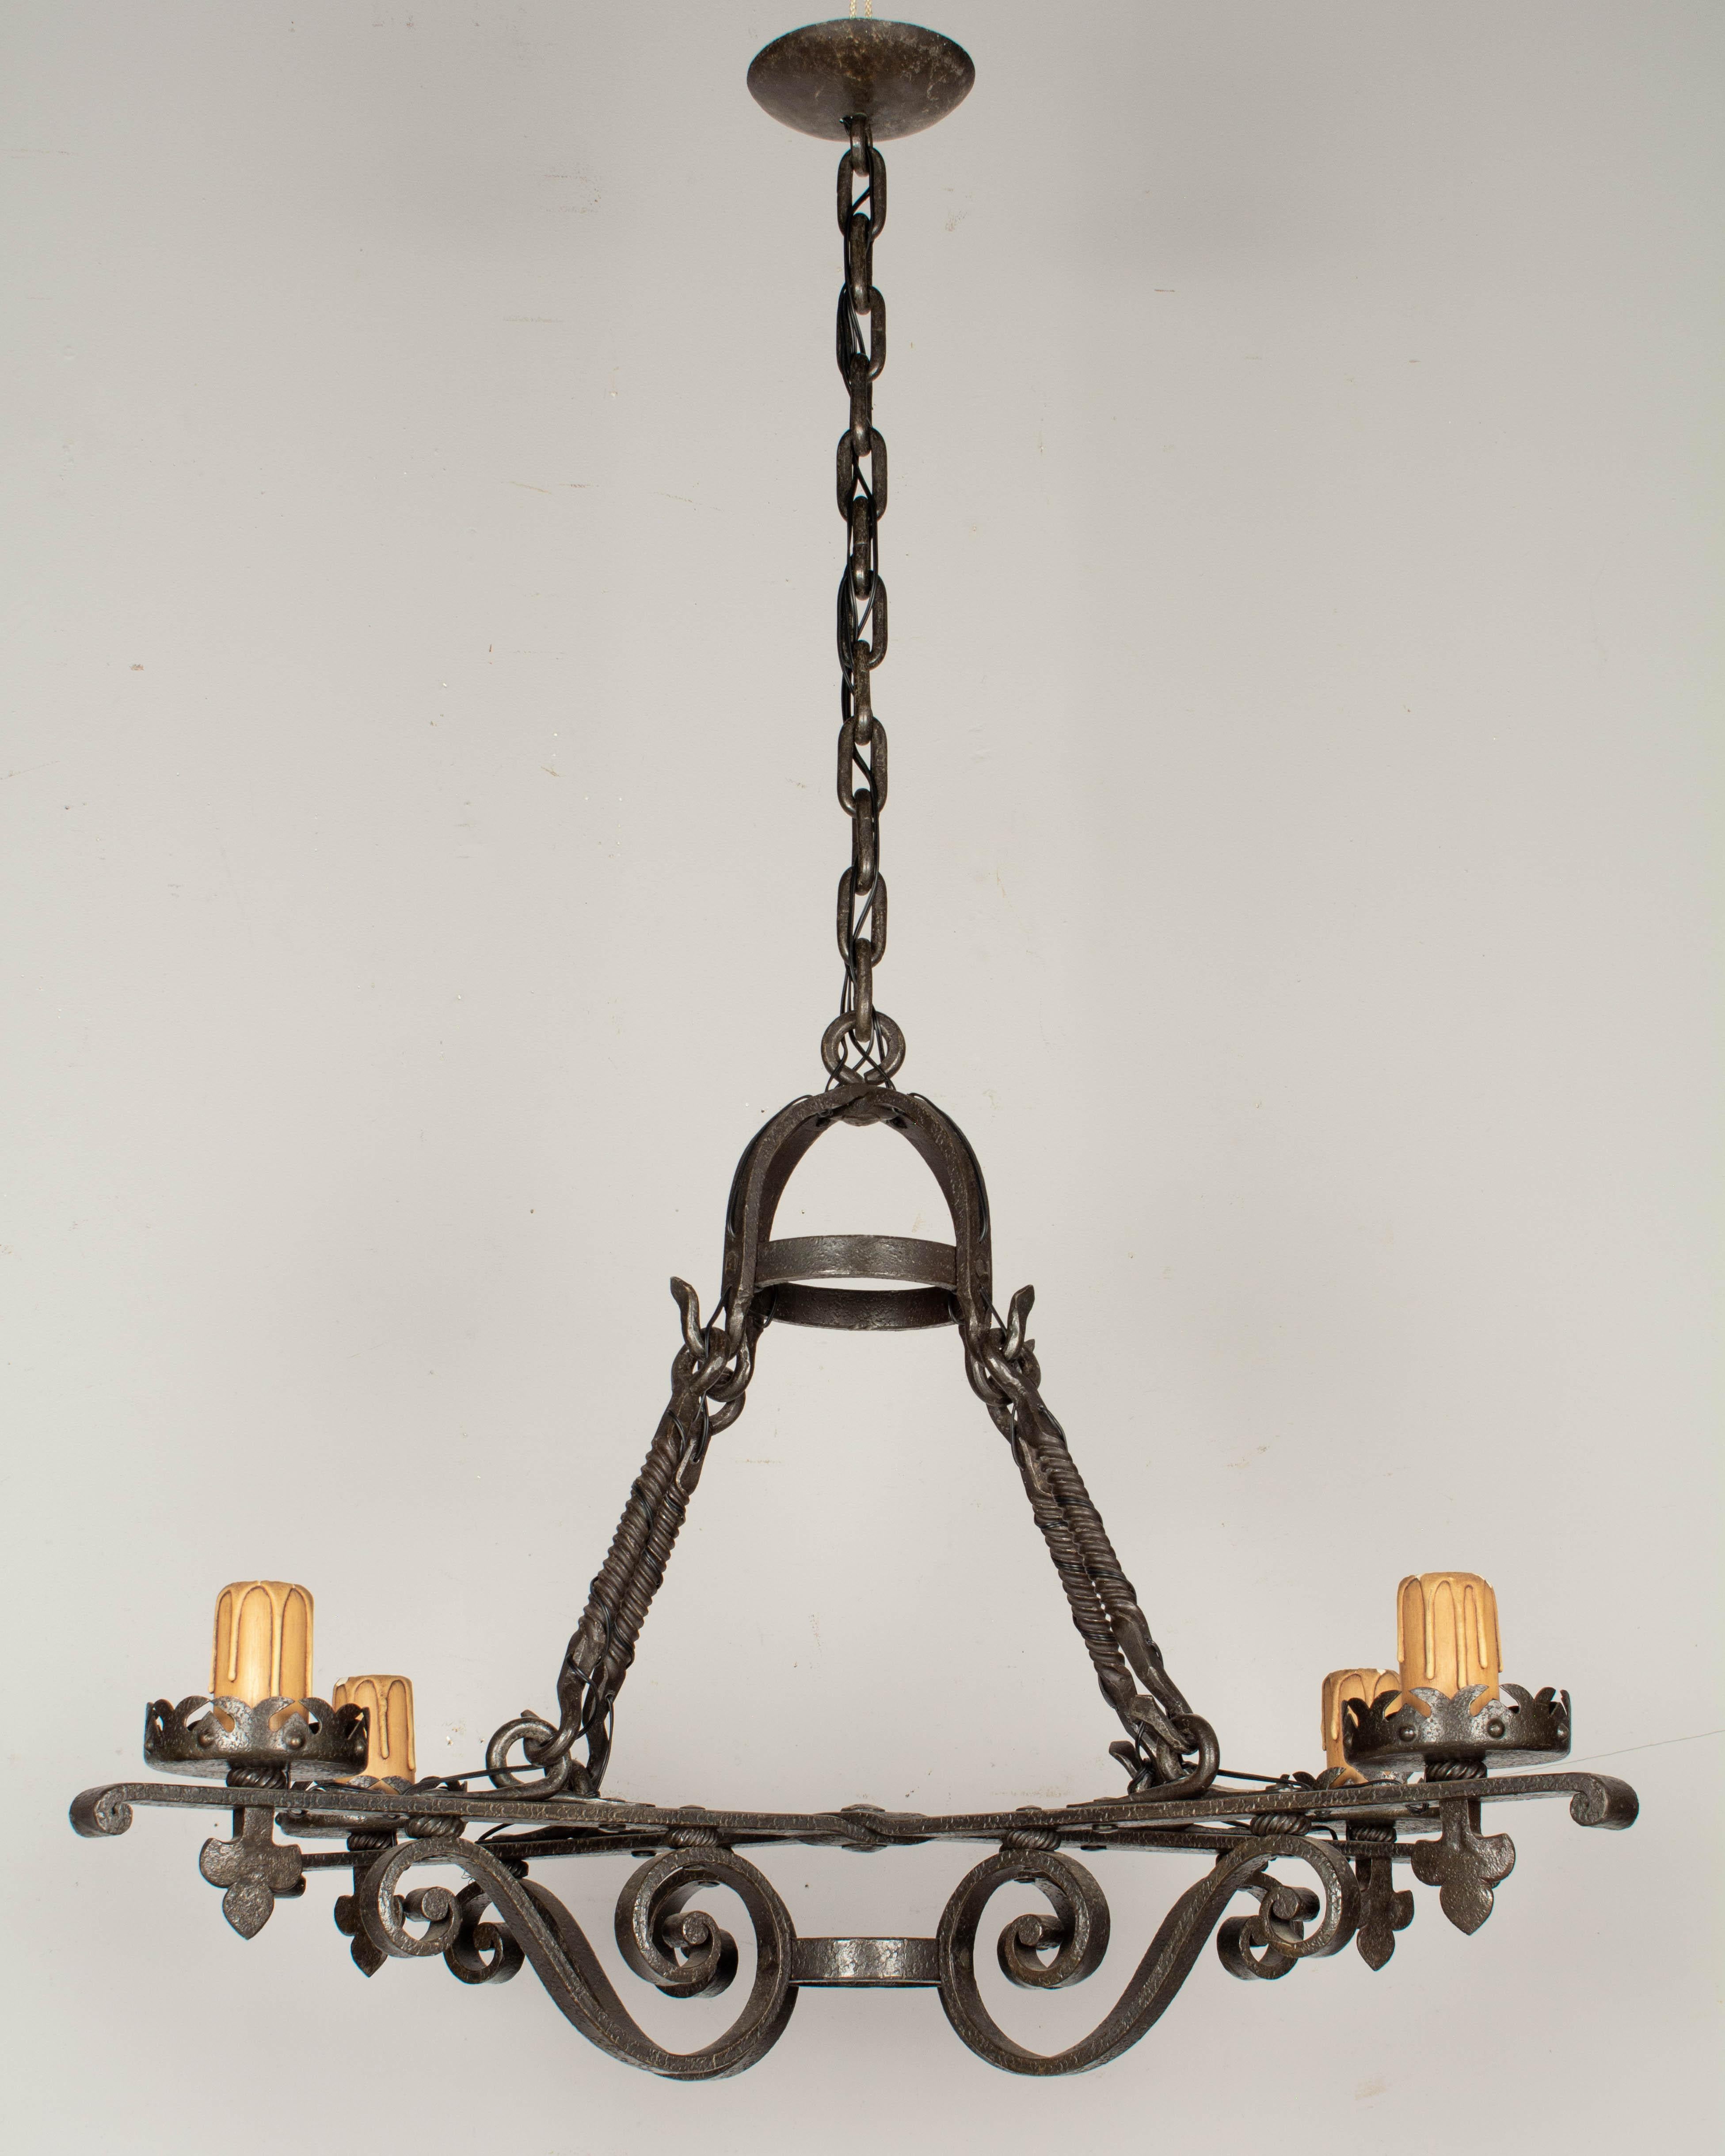 A heavy French Art Deco four-light wrought iron scroll form rectangular chandelier. Exceptional craftsmanship. In working condition, rewired with new sockets. Original candle covers, thick chain and canopy. 
Measures: 26